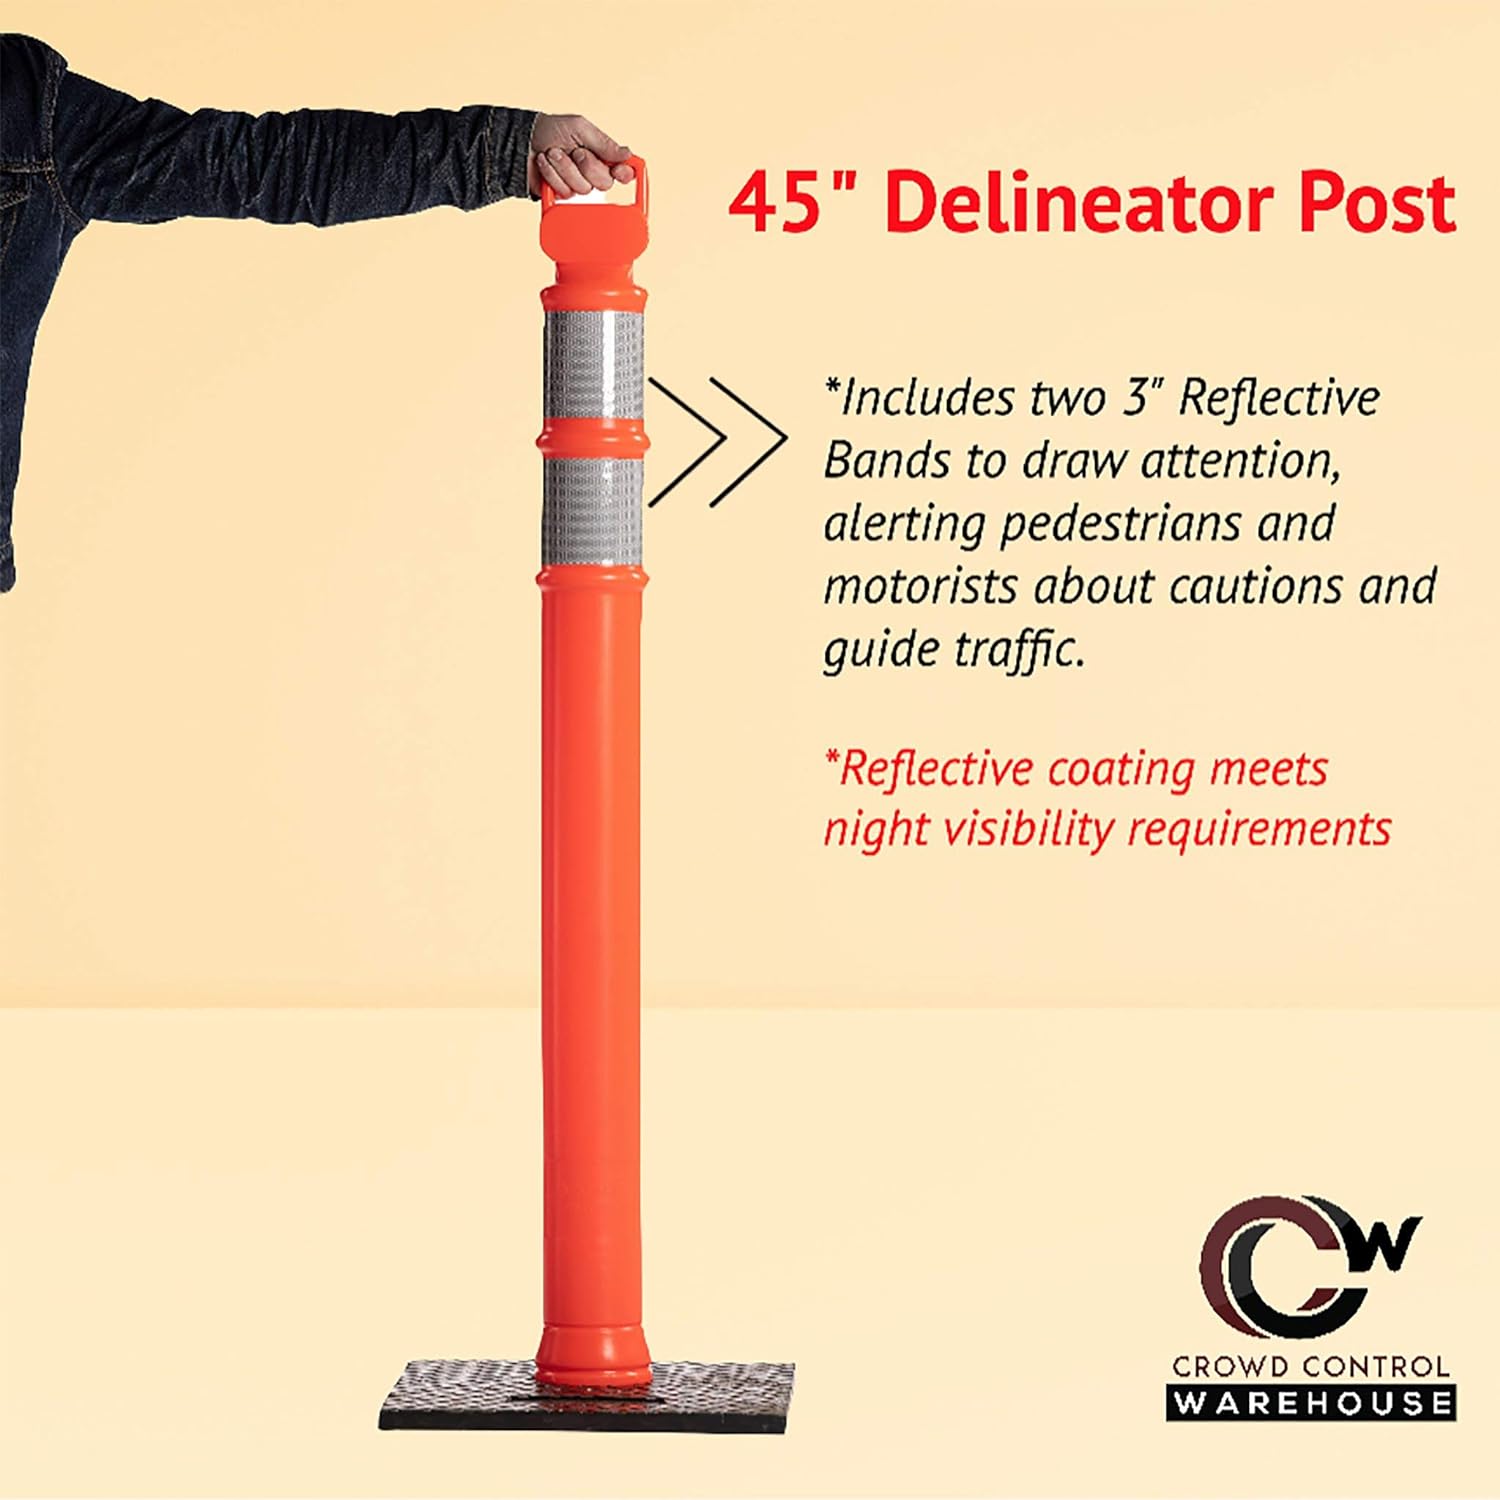 Generic Trafford Industrial Set of 2 45" Delineator Posts with Removable 10lb Rubber Base, Reflective Collars - Black